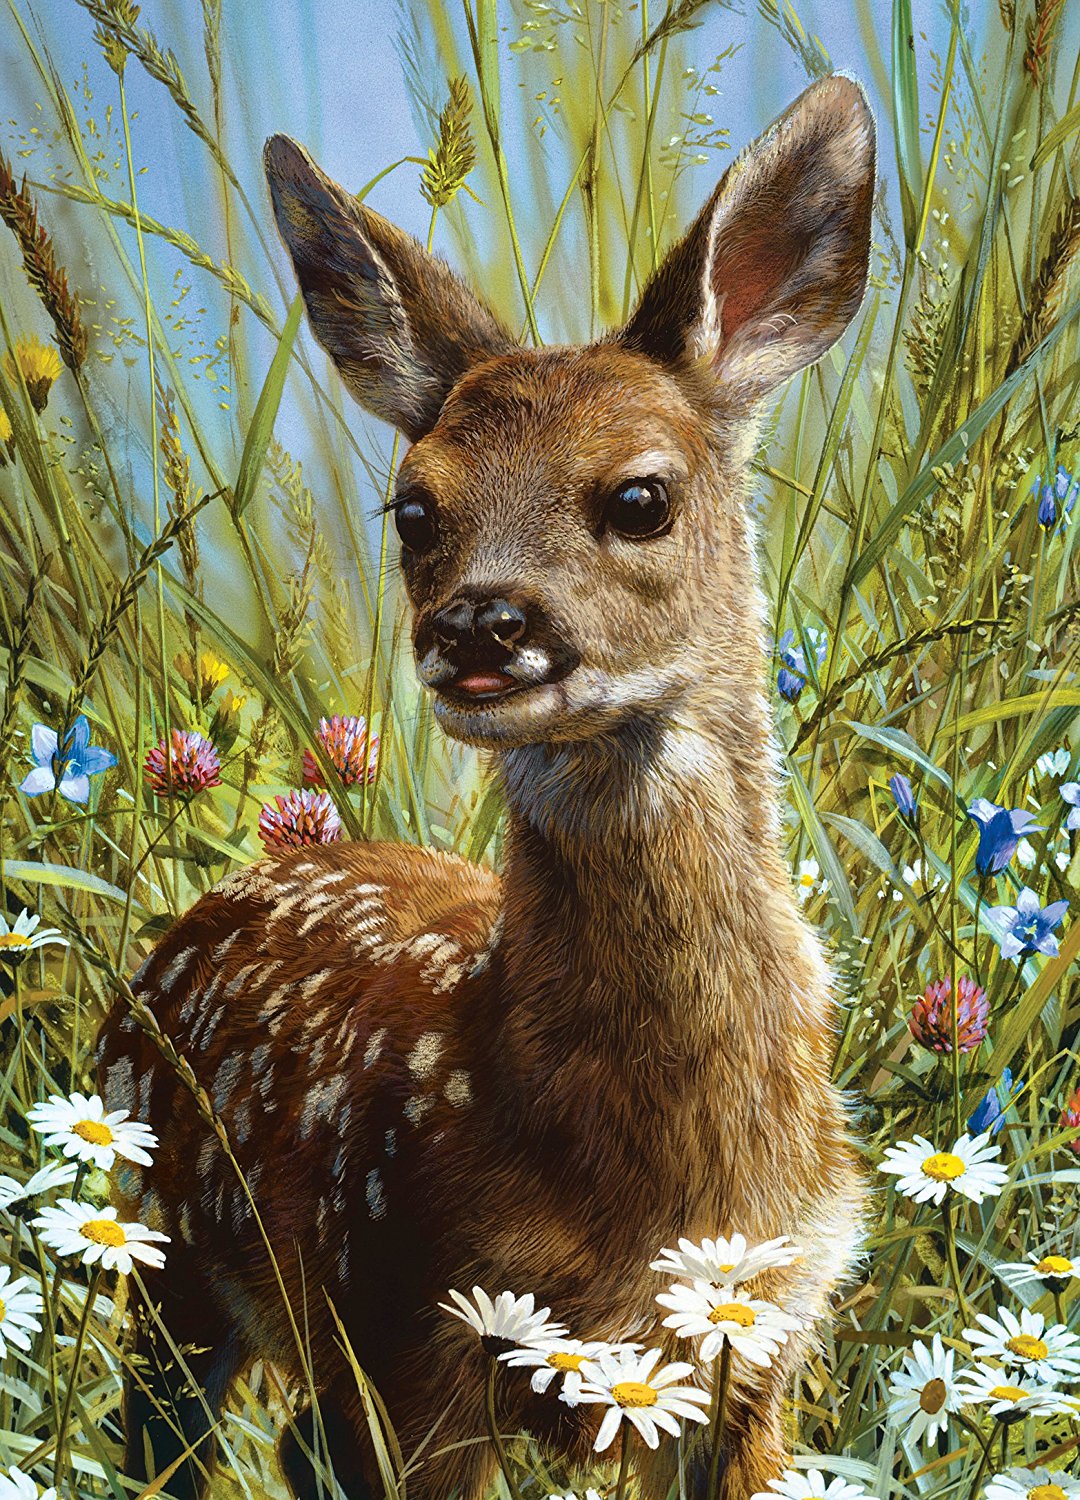 MasterPieces Animal Planet Spring Fawn - Deer 1000 Piece Jigsaw Puzzle by Carl Brenders - image 2 of 2